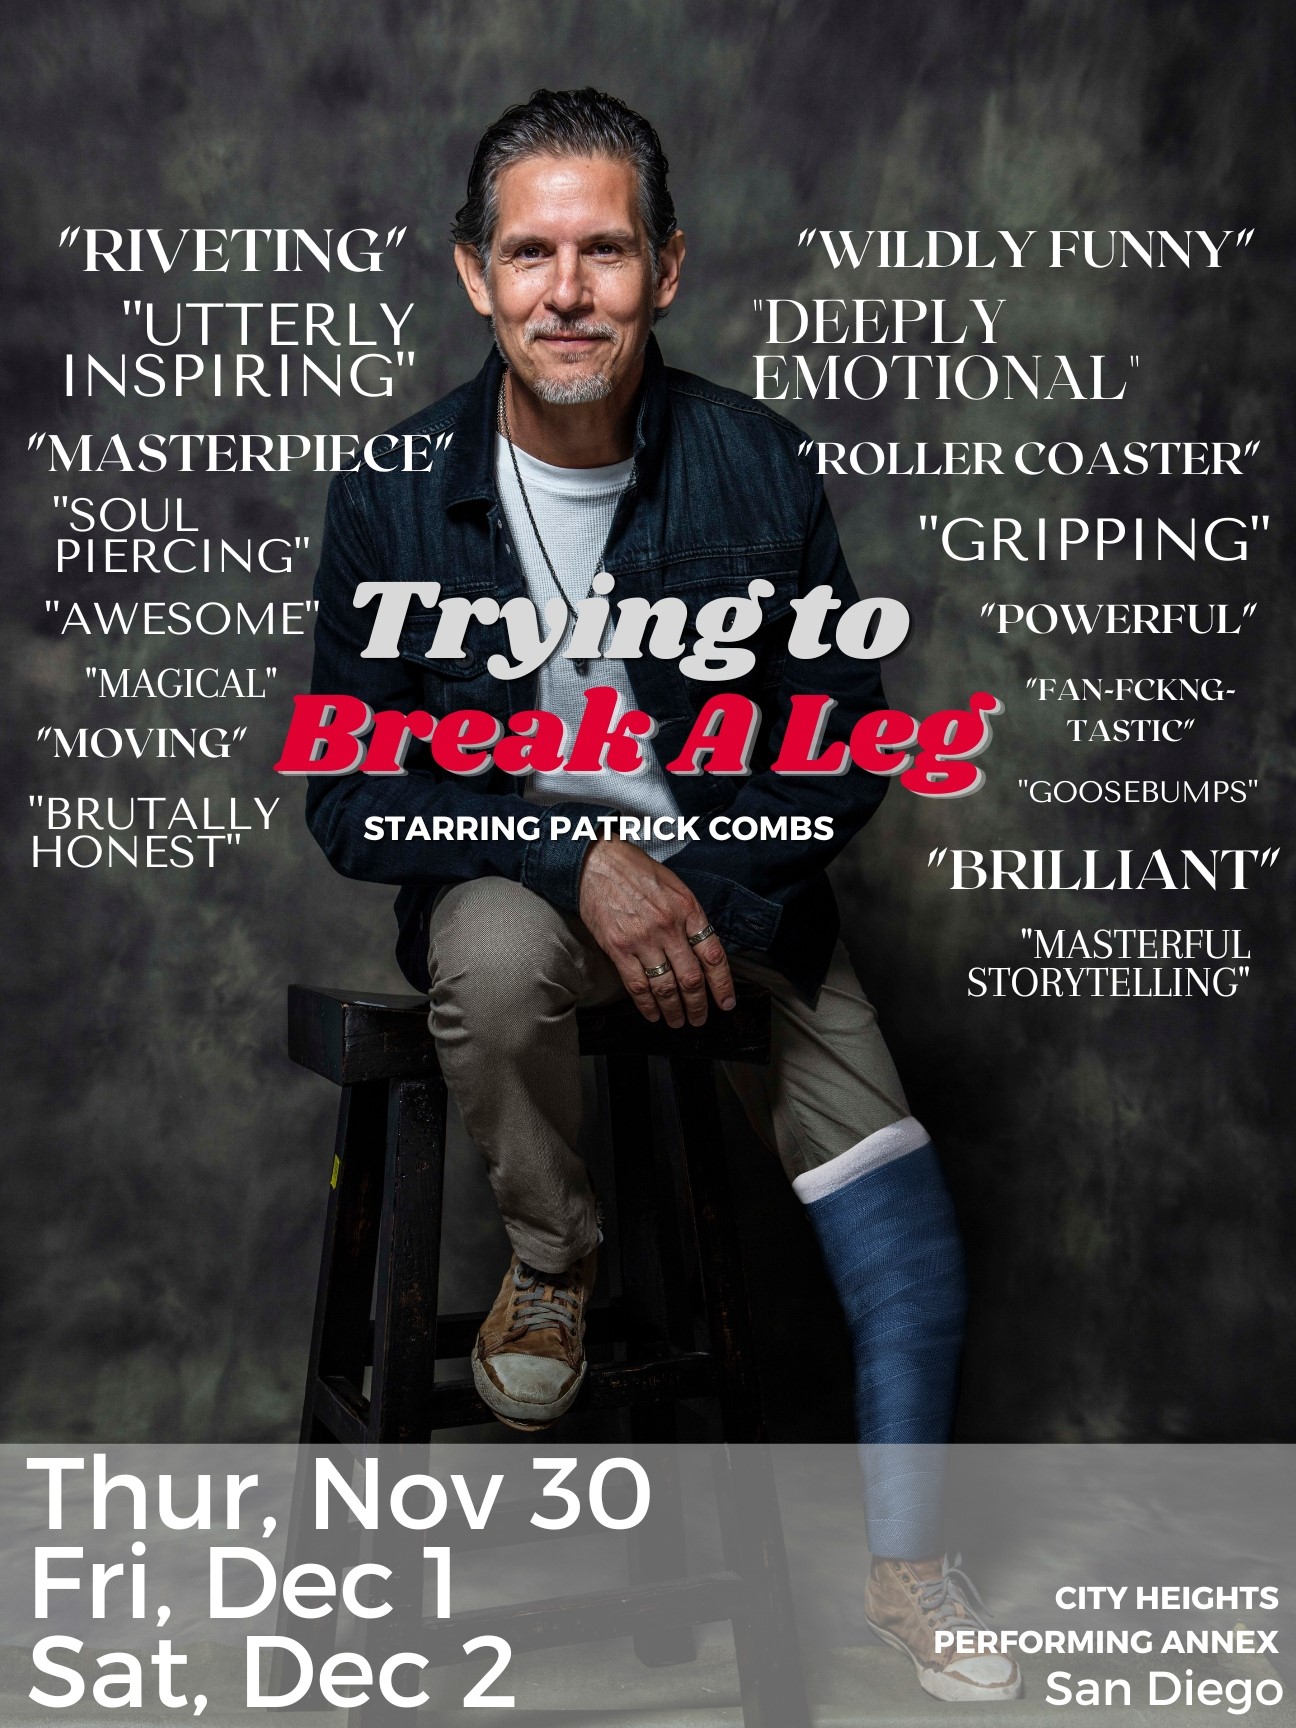 Trying to Break A Leg Starring Patrick Combs on Dec 04, 00:00@City Heights Performing Annex - Buy tickets and Get information on Miracle Minded, Inc tryingtobreakaleg.com